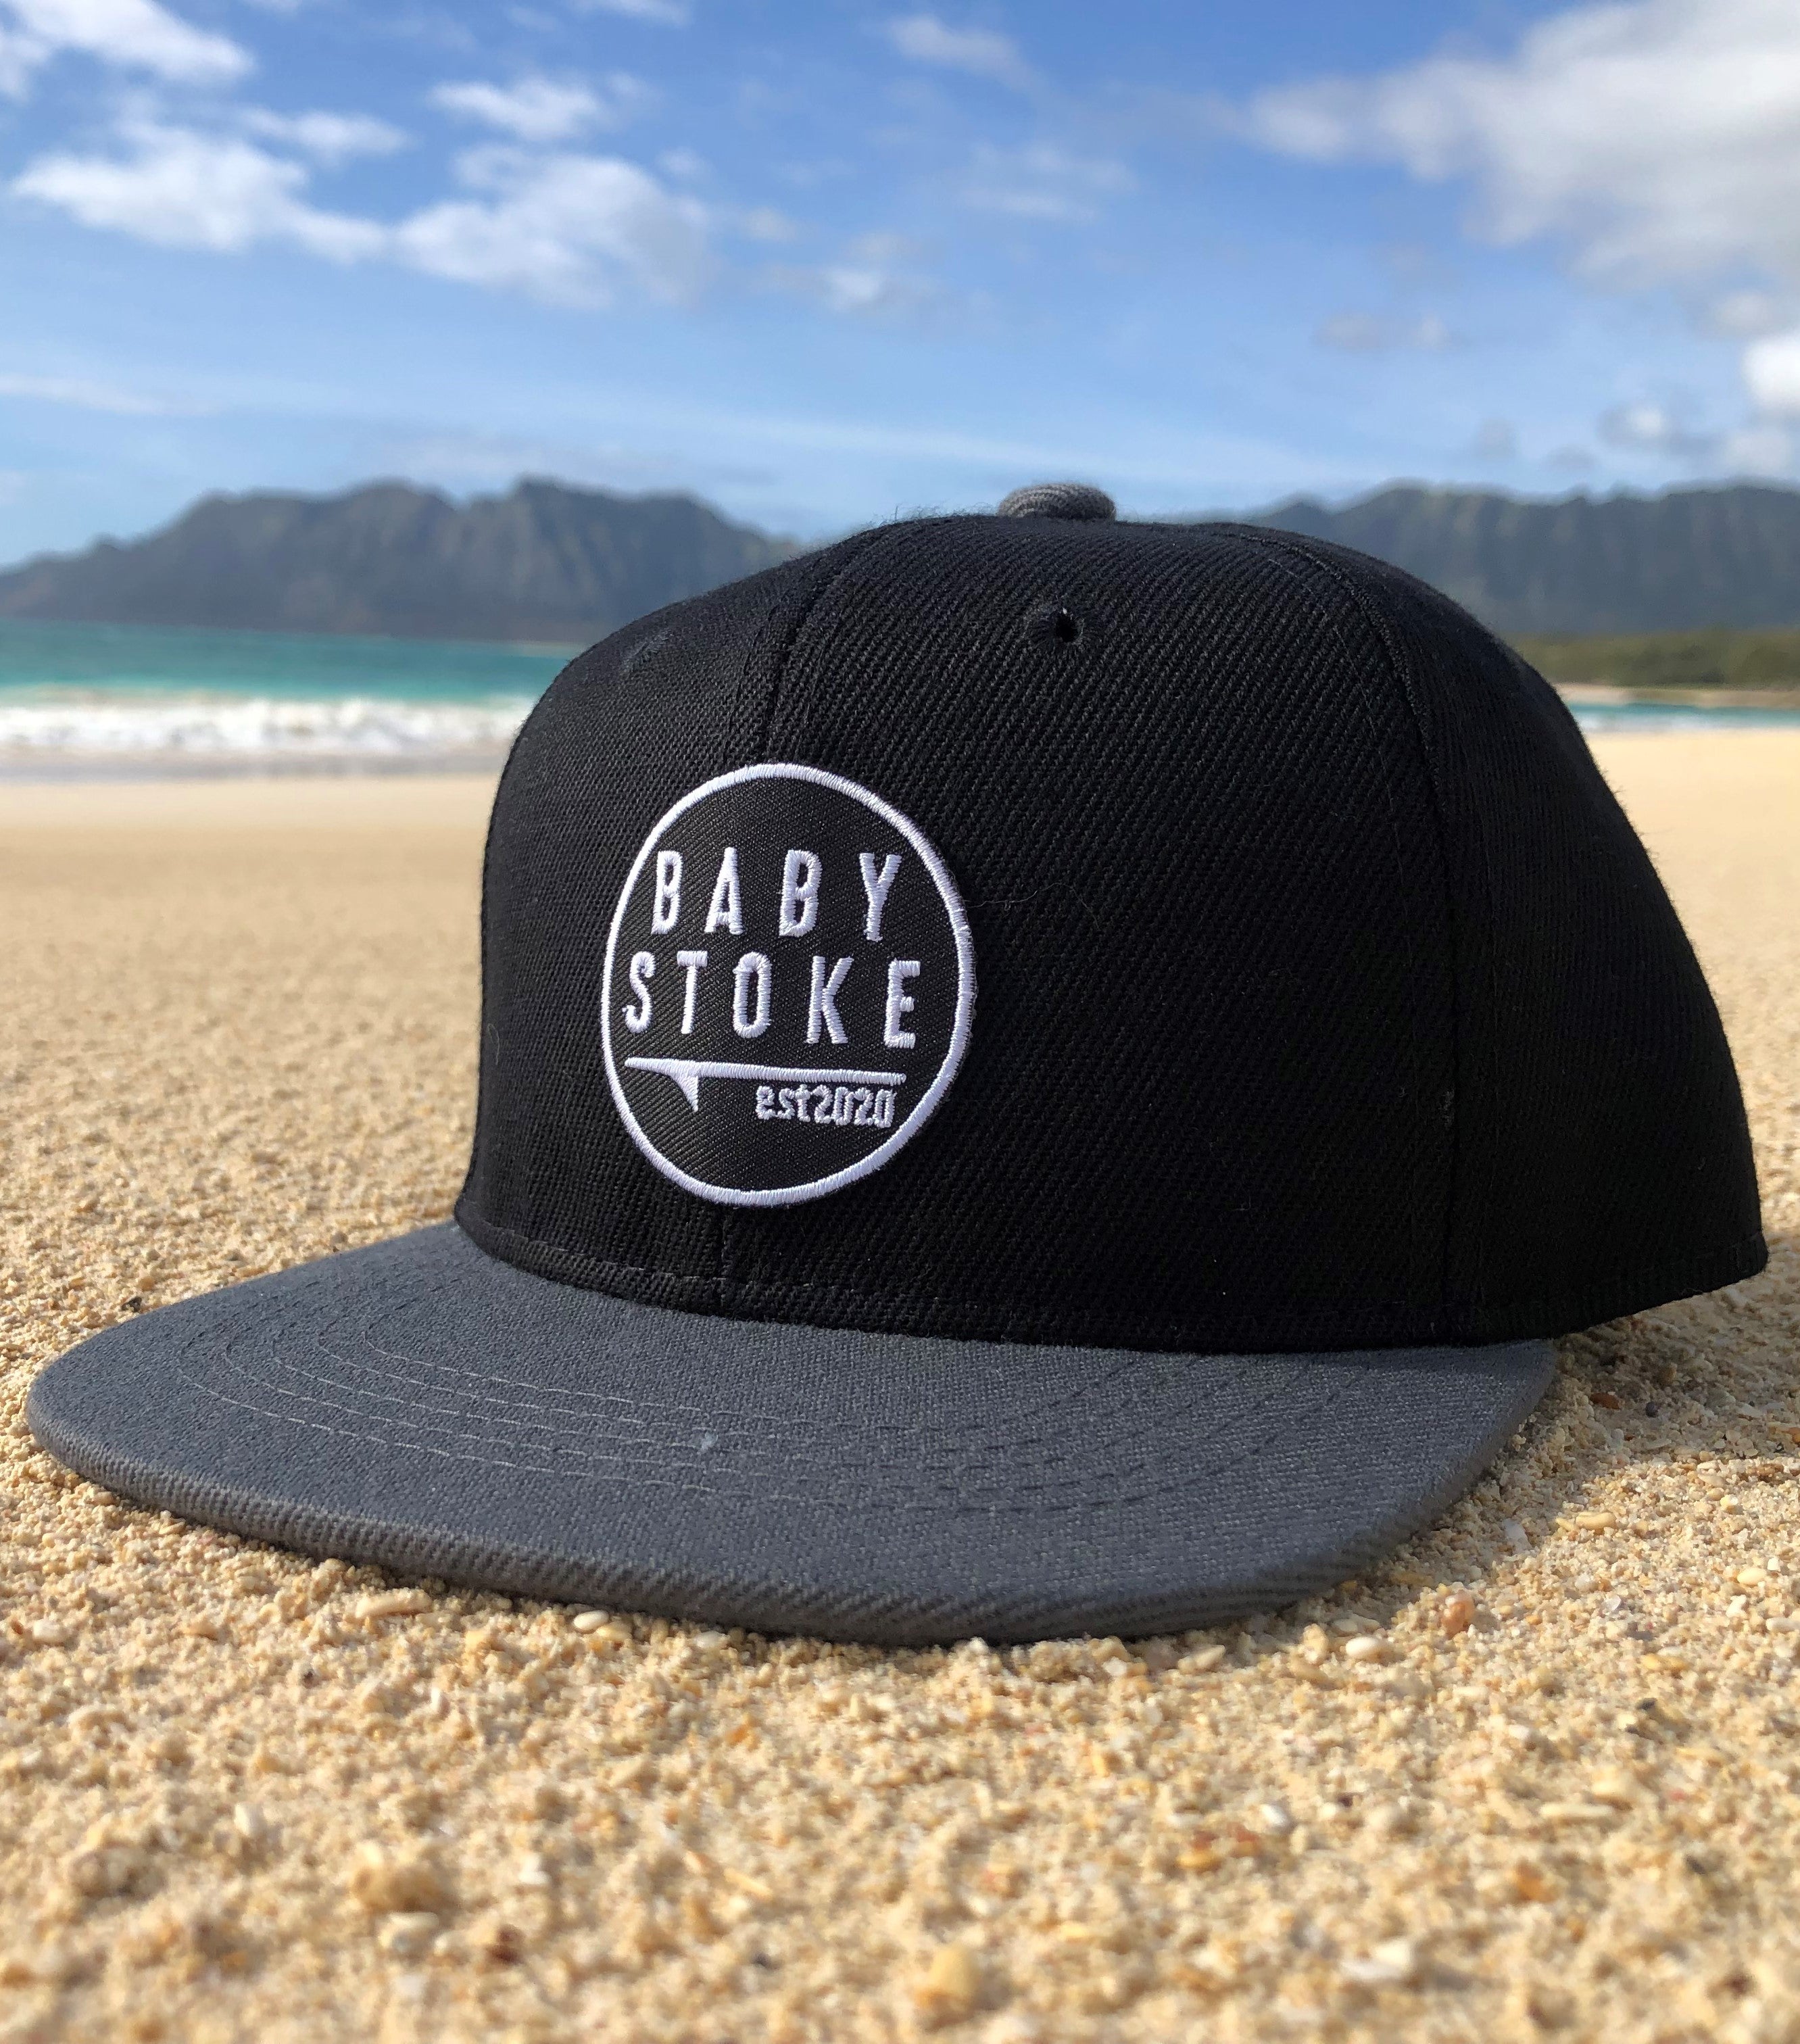 Black snapback with grey bill established 2020 sun hat on the sand at the beach in hawaii for toddlers and babies